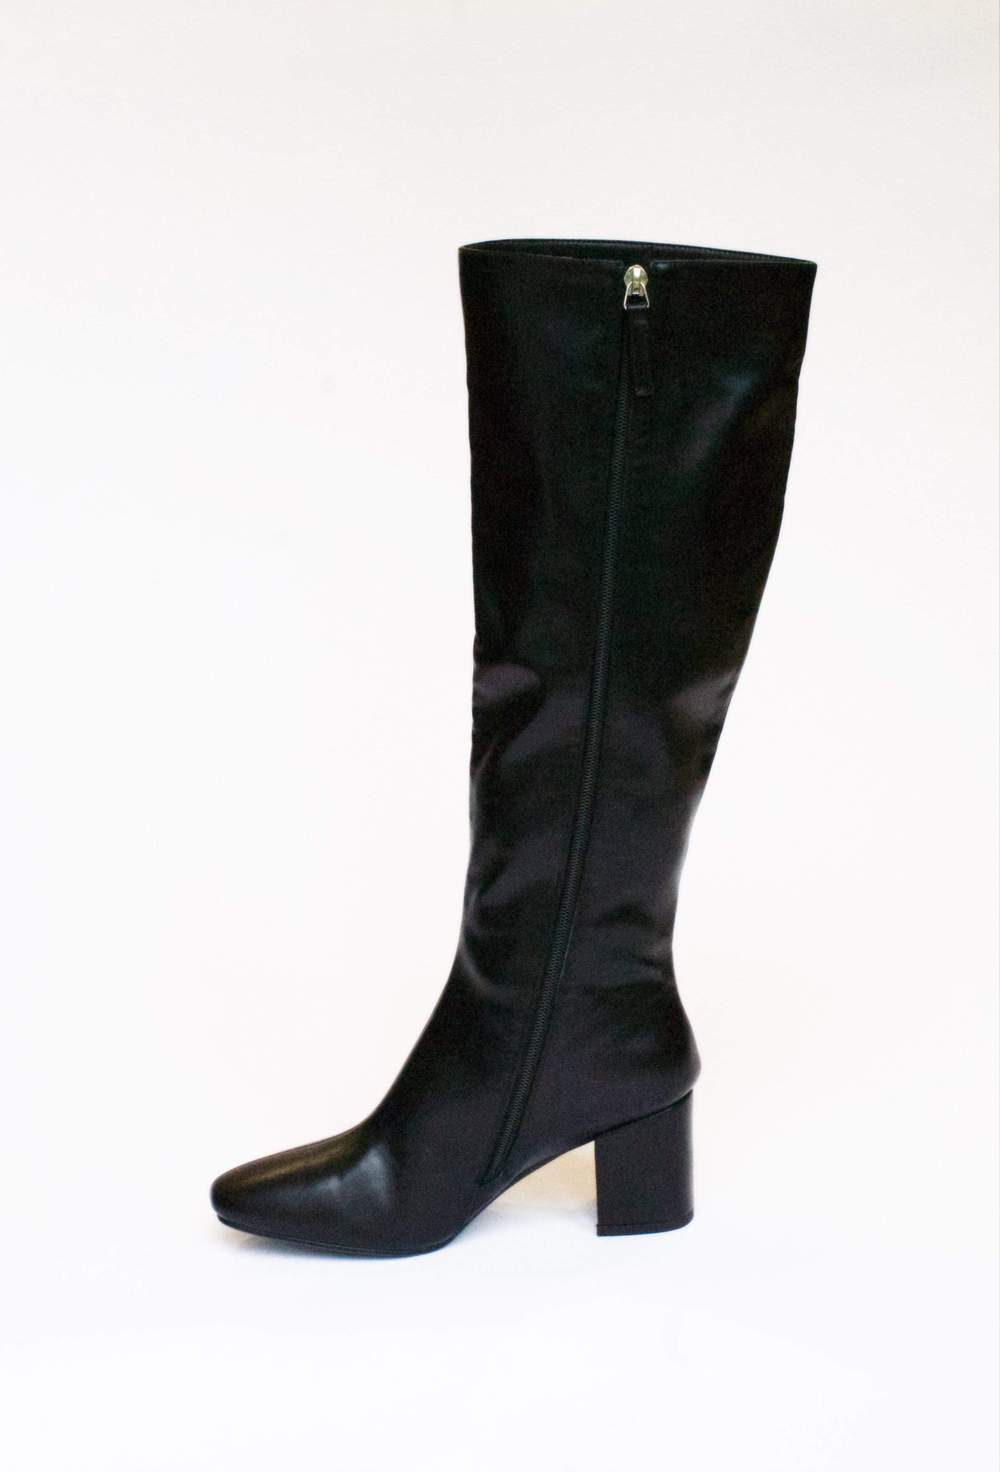 heeled black vegan boots knee high from collection & co, featuring full length zip